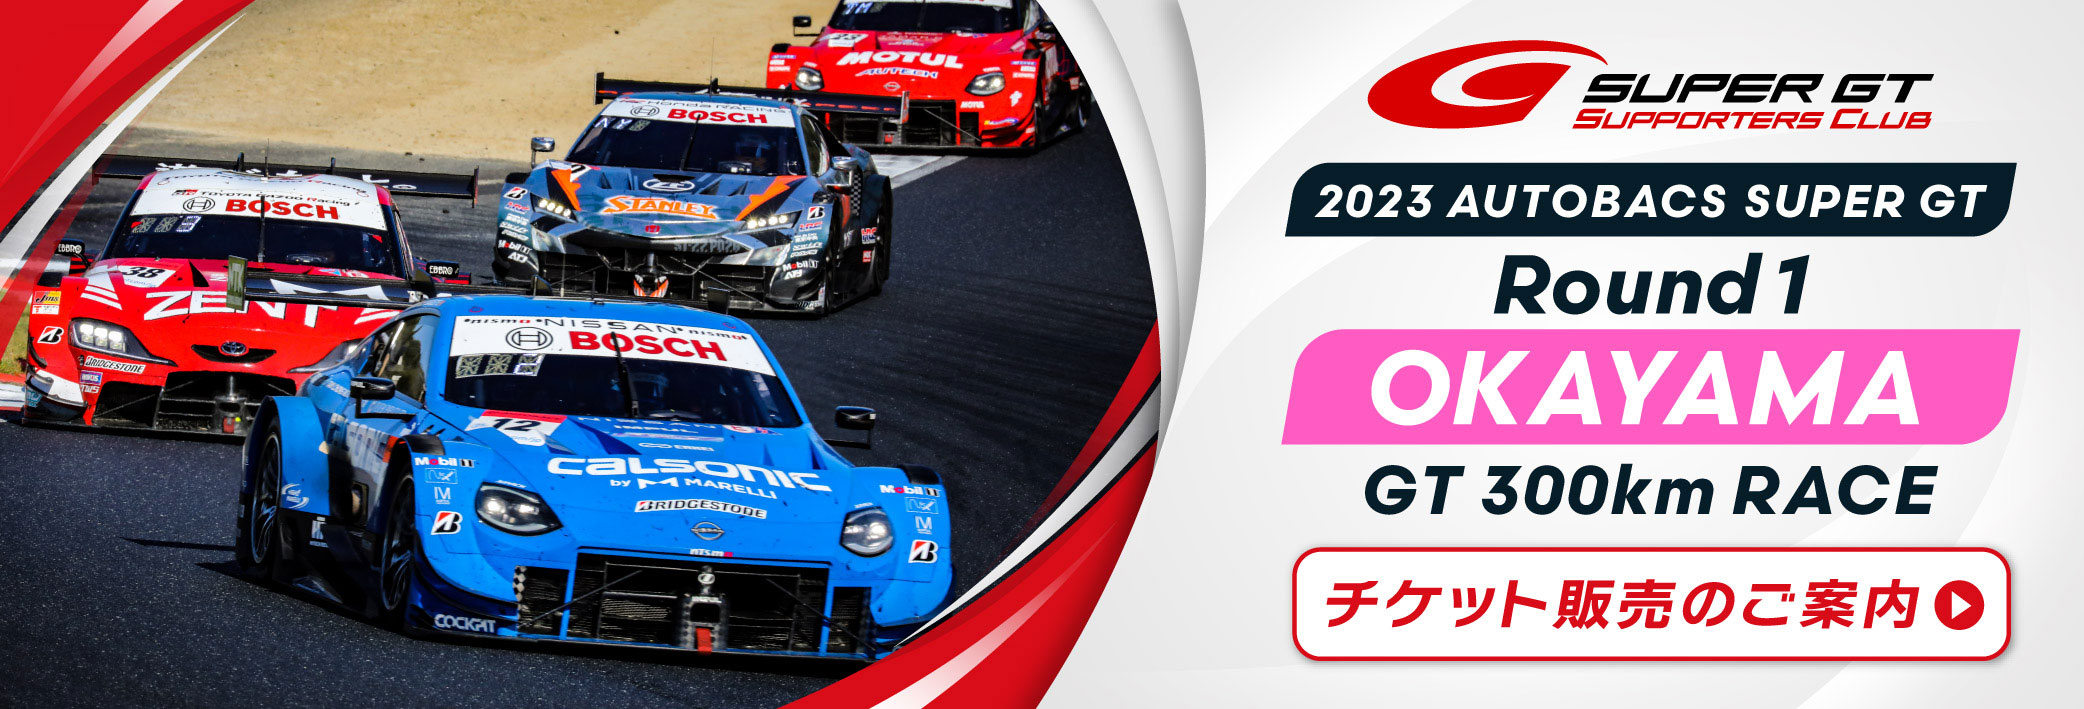 SUPER GT Round5 鈴鹿サーキット チケット